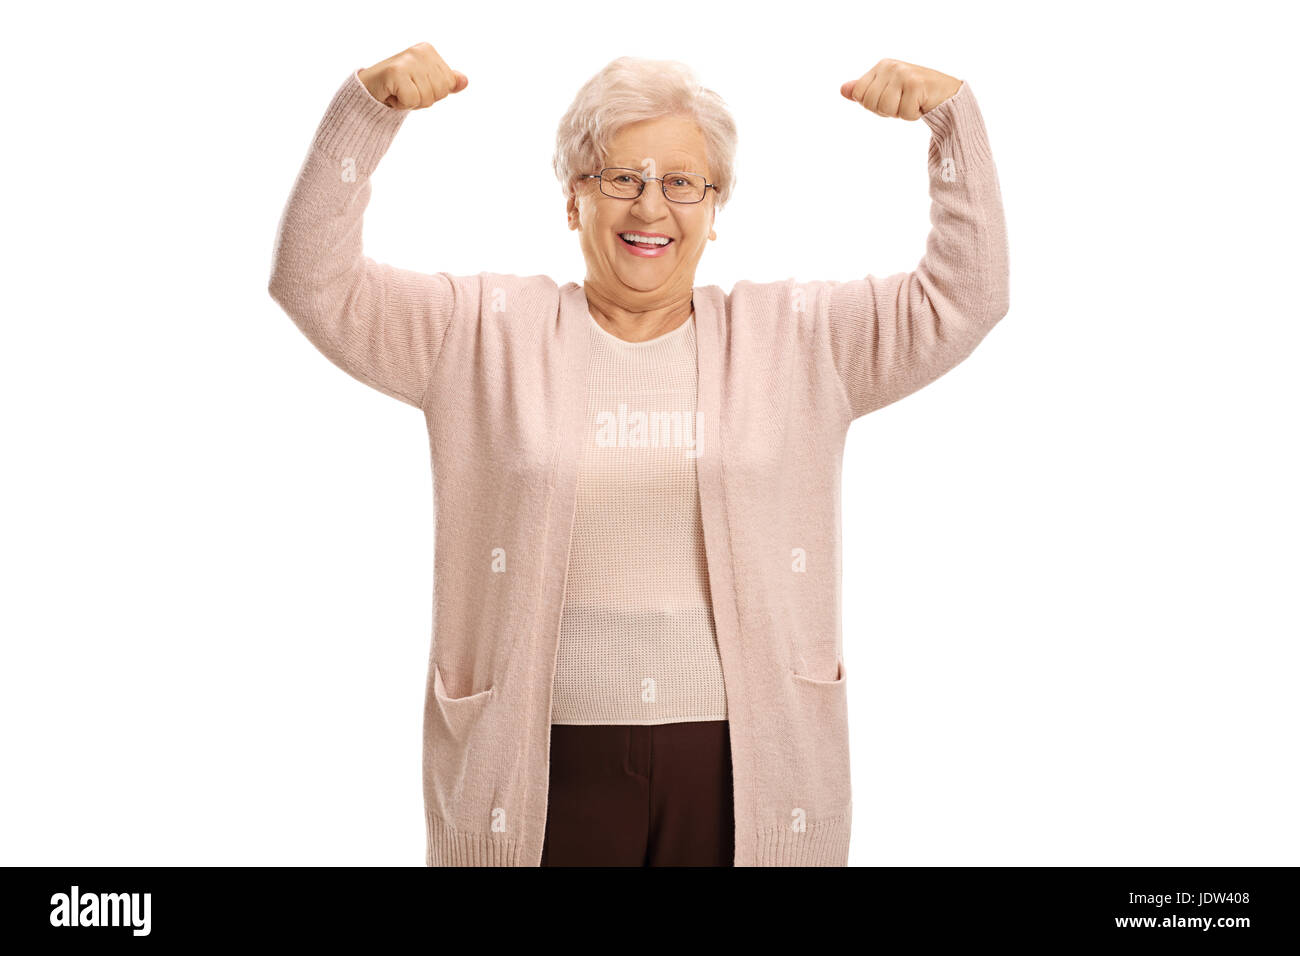 Cheerful mature woman flexing her muscles isolated on white background Stock Photo